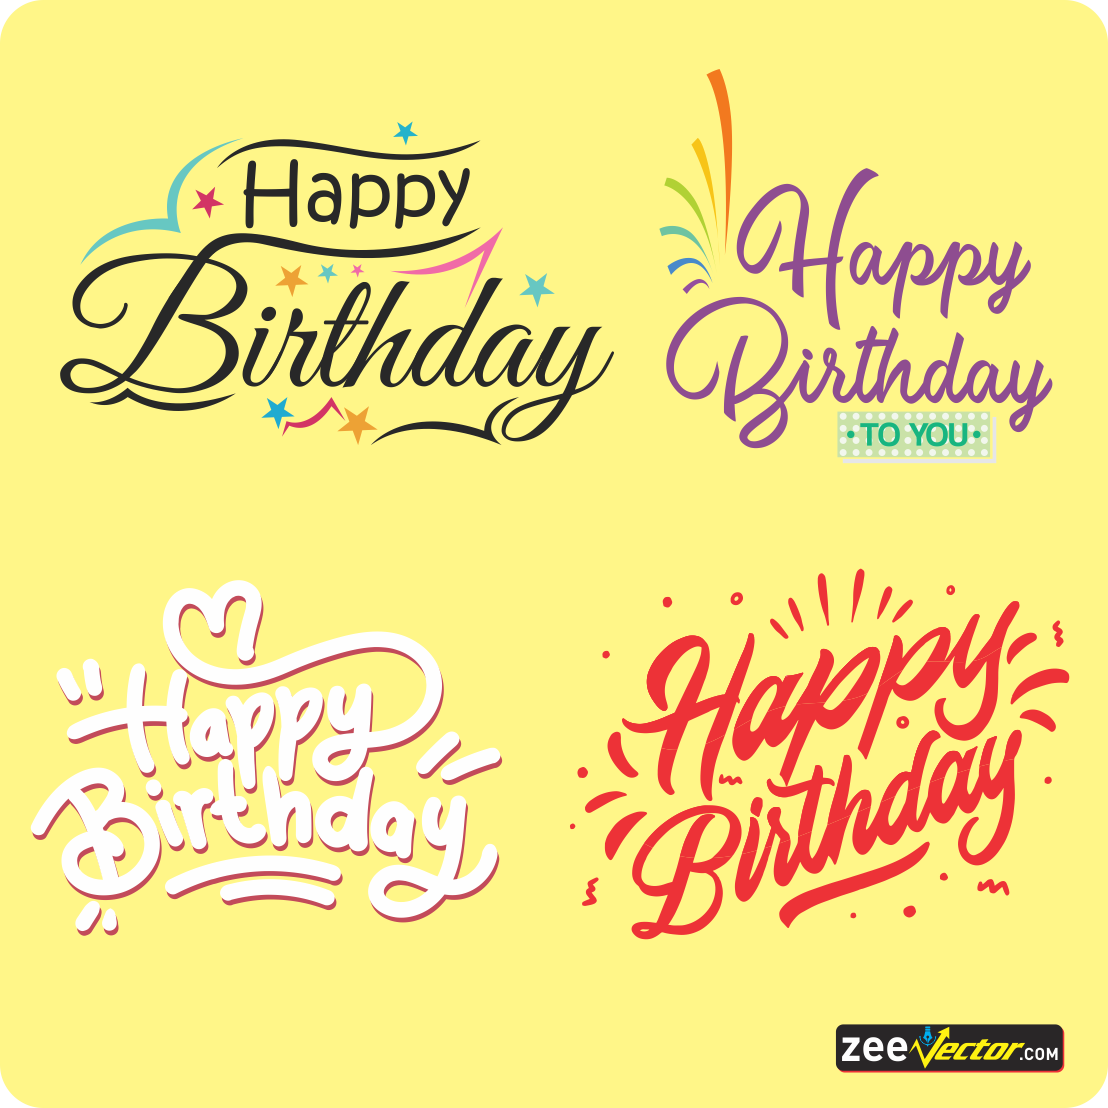 Happy Birthday Calligraphy Vector - FREE Vector Design - Cdr, Ai, EPS, PNG, SVG